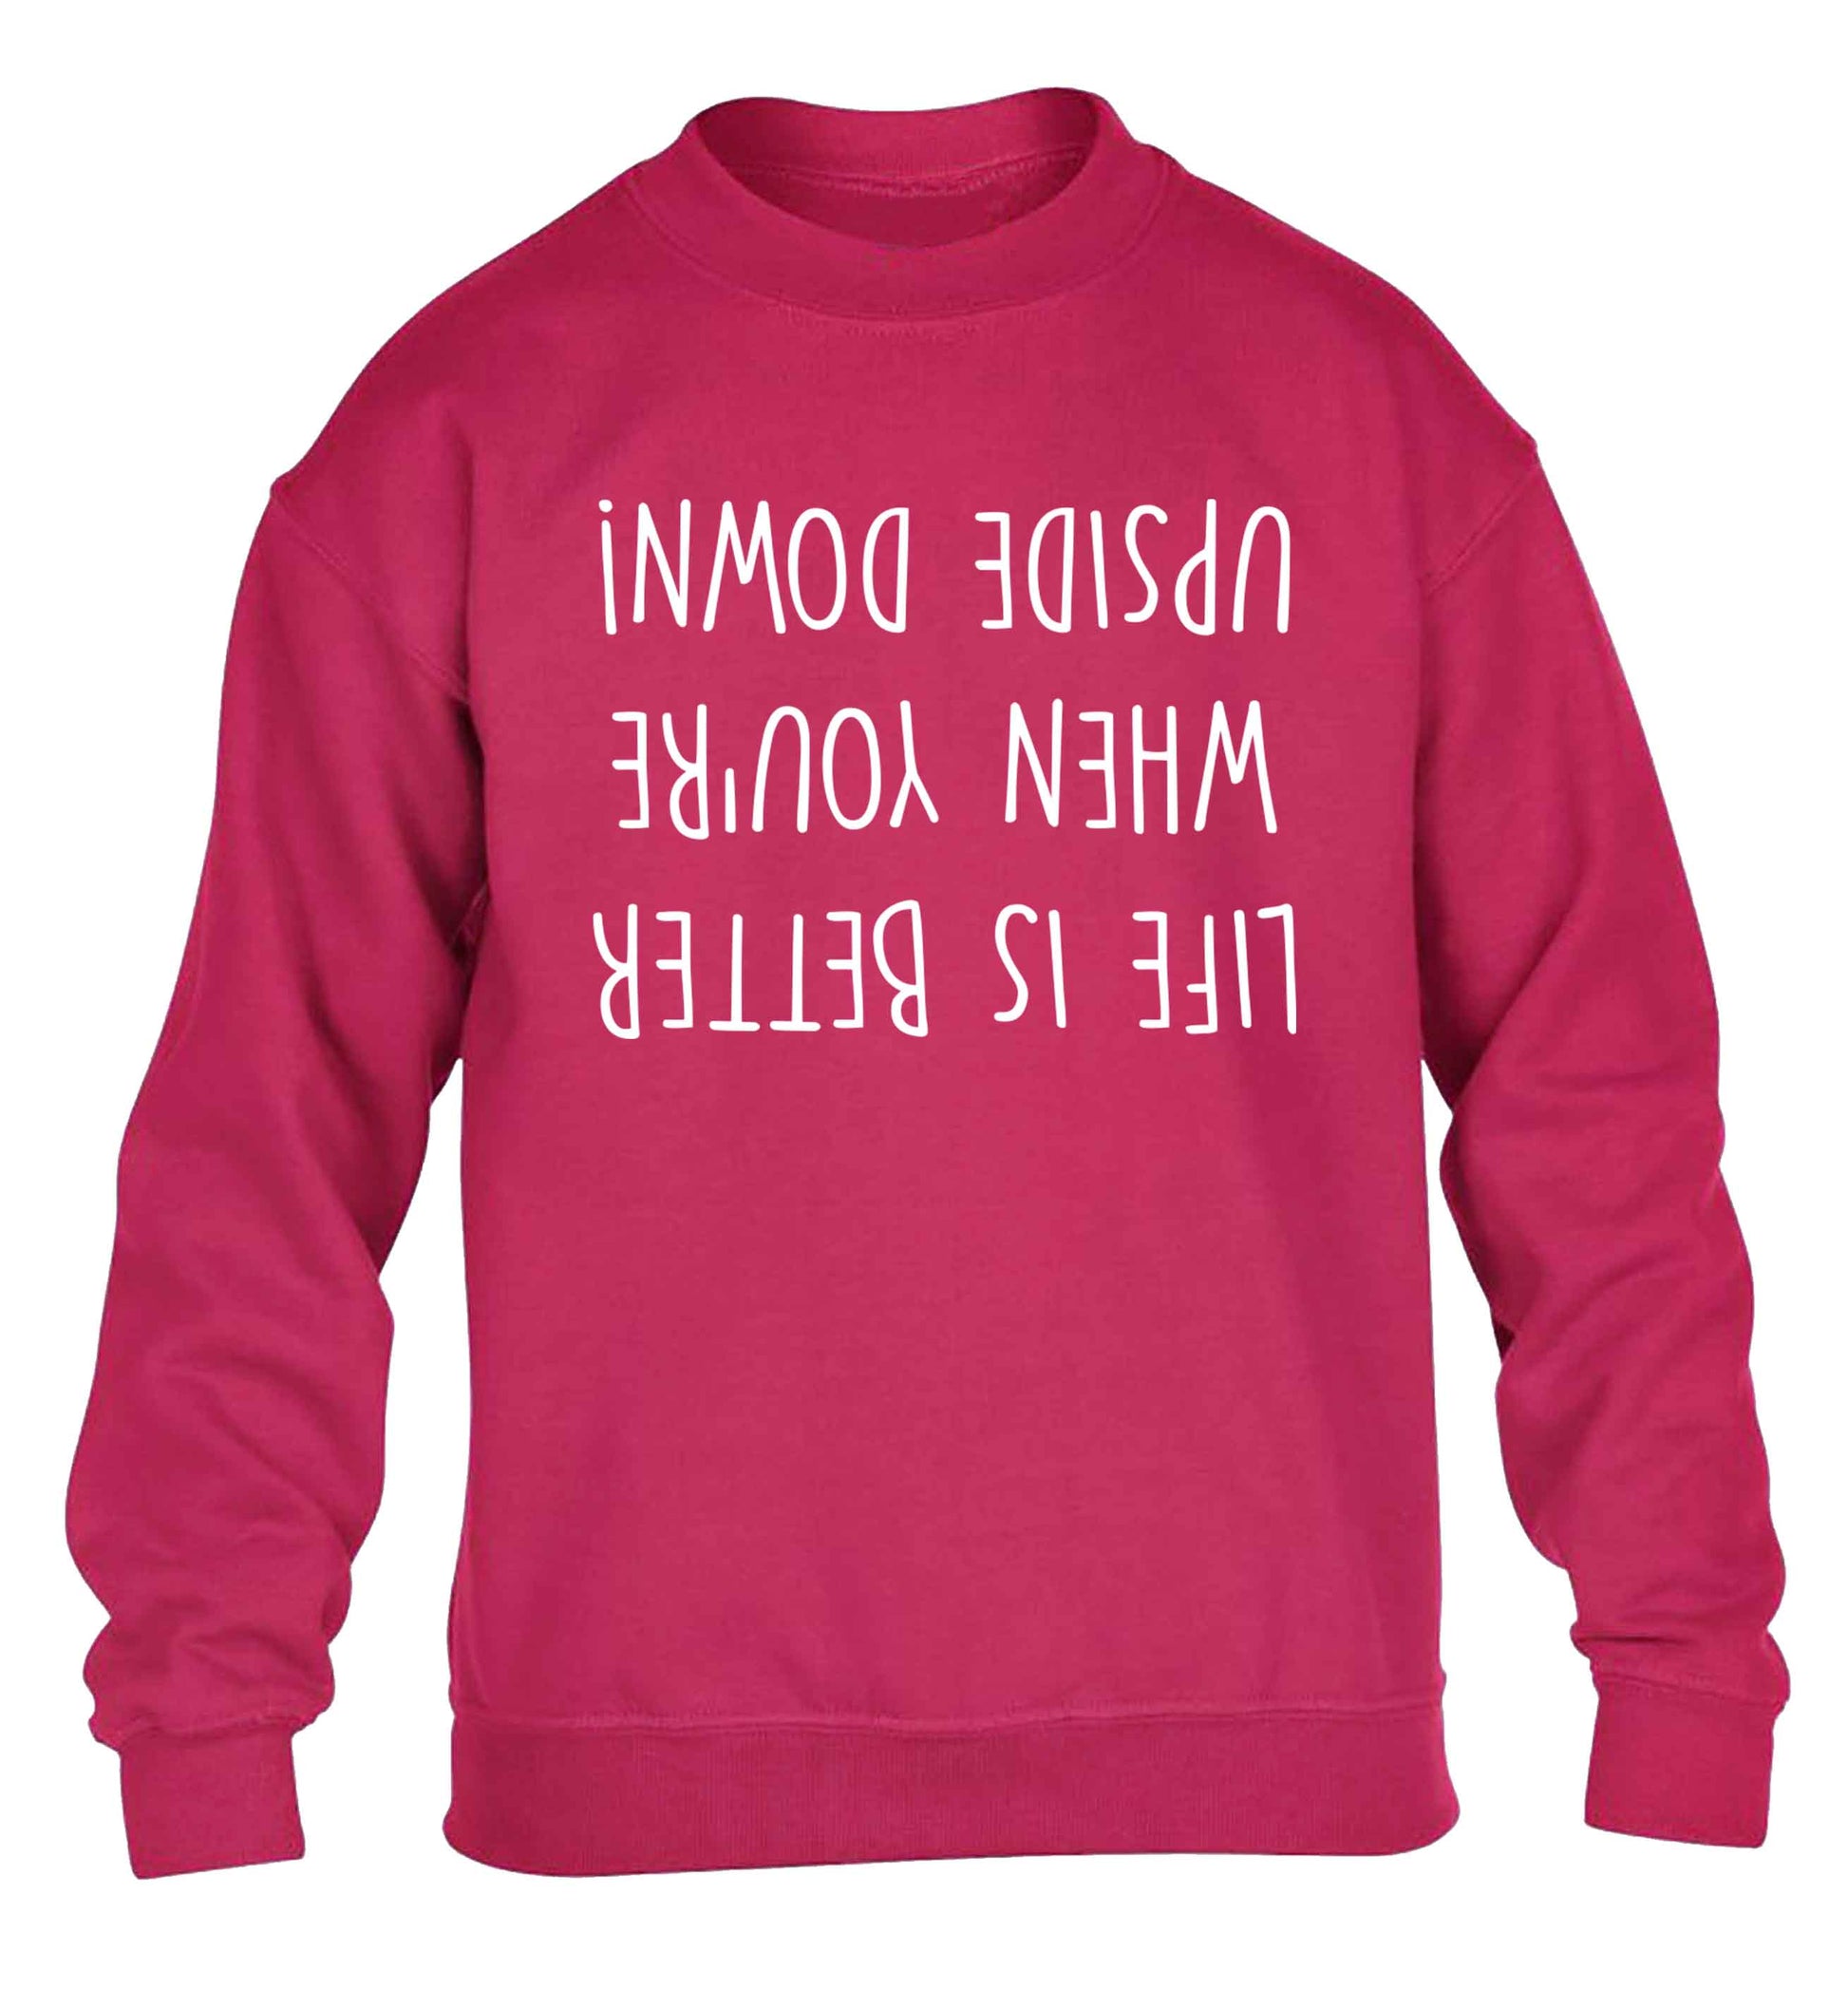 Life is better upside down children's pink sweater 12-13 Years